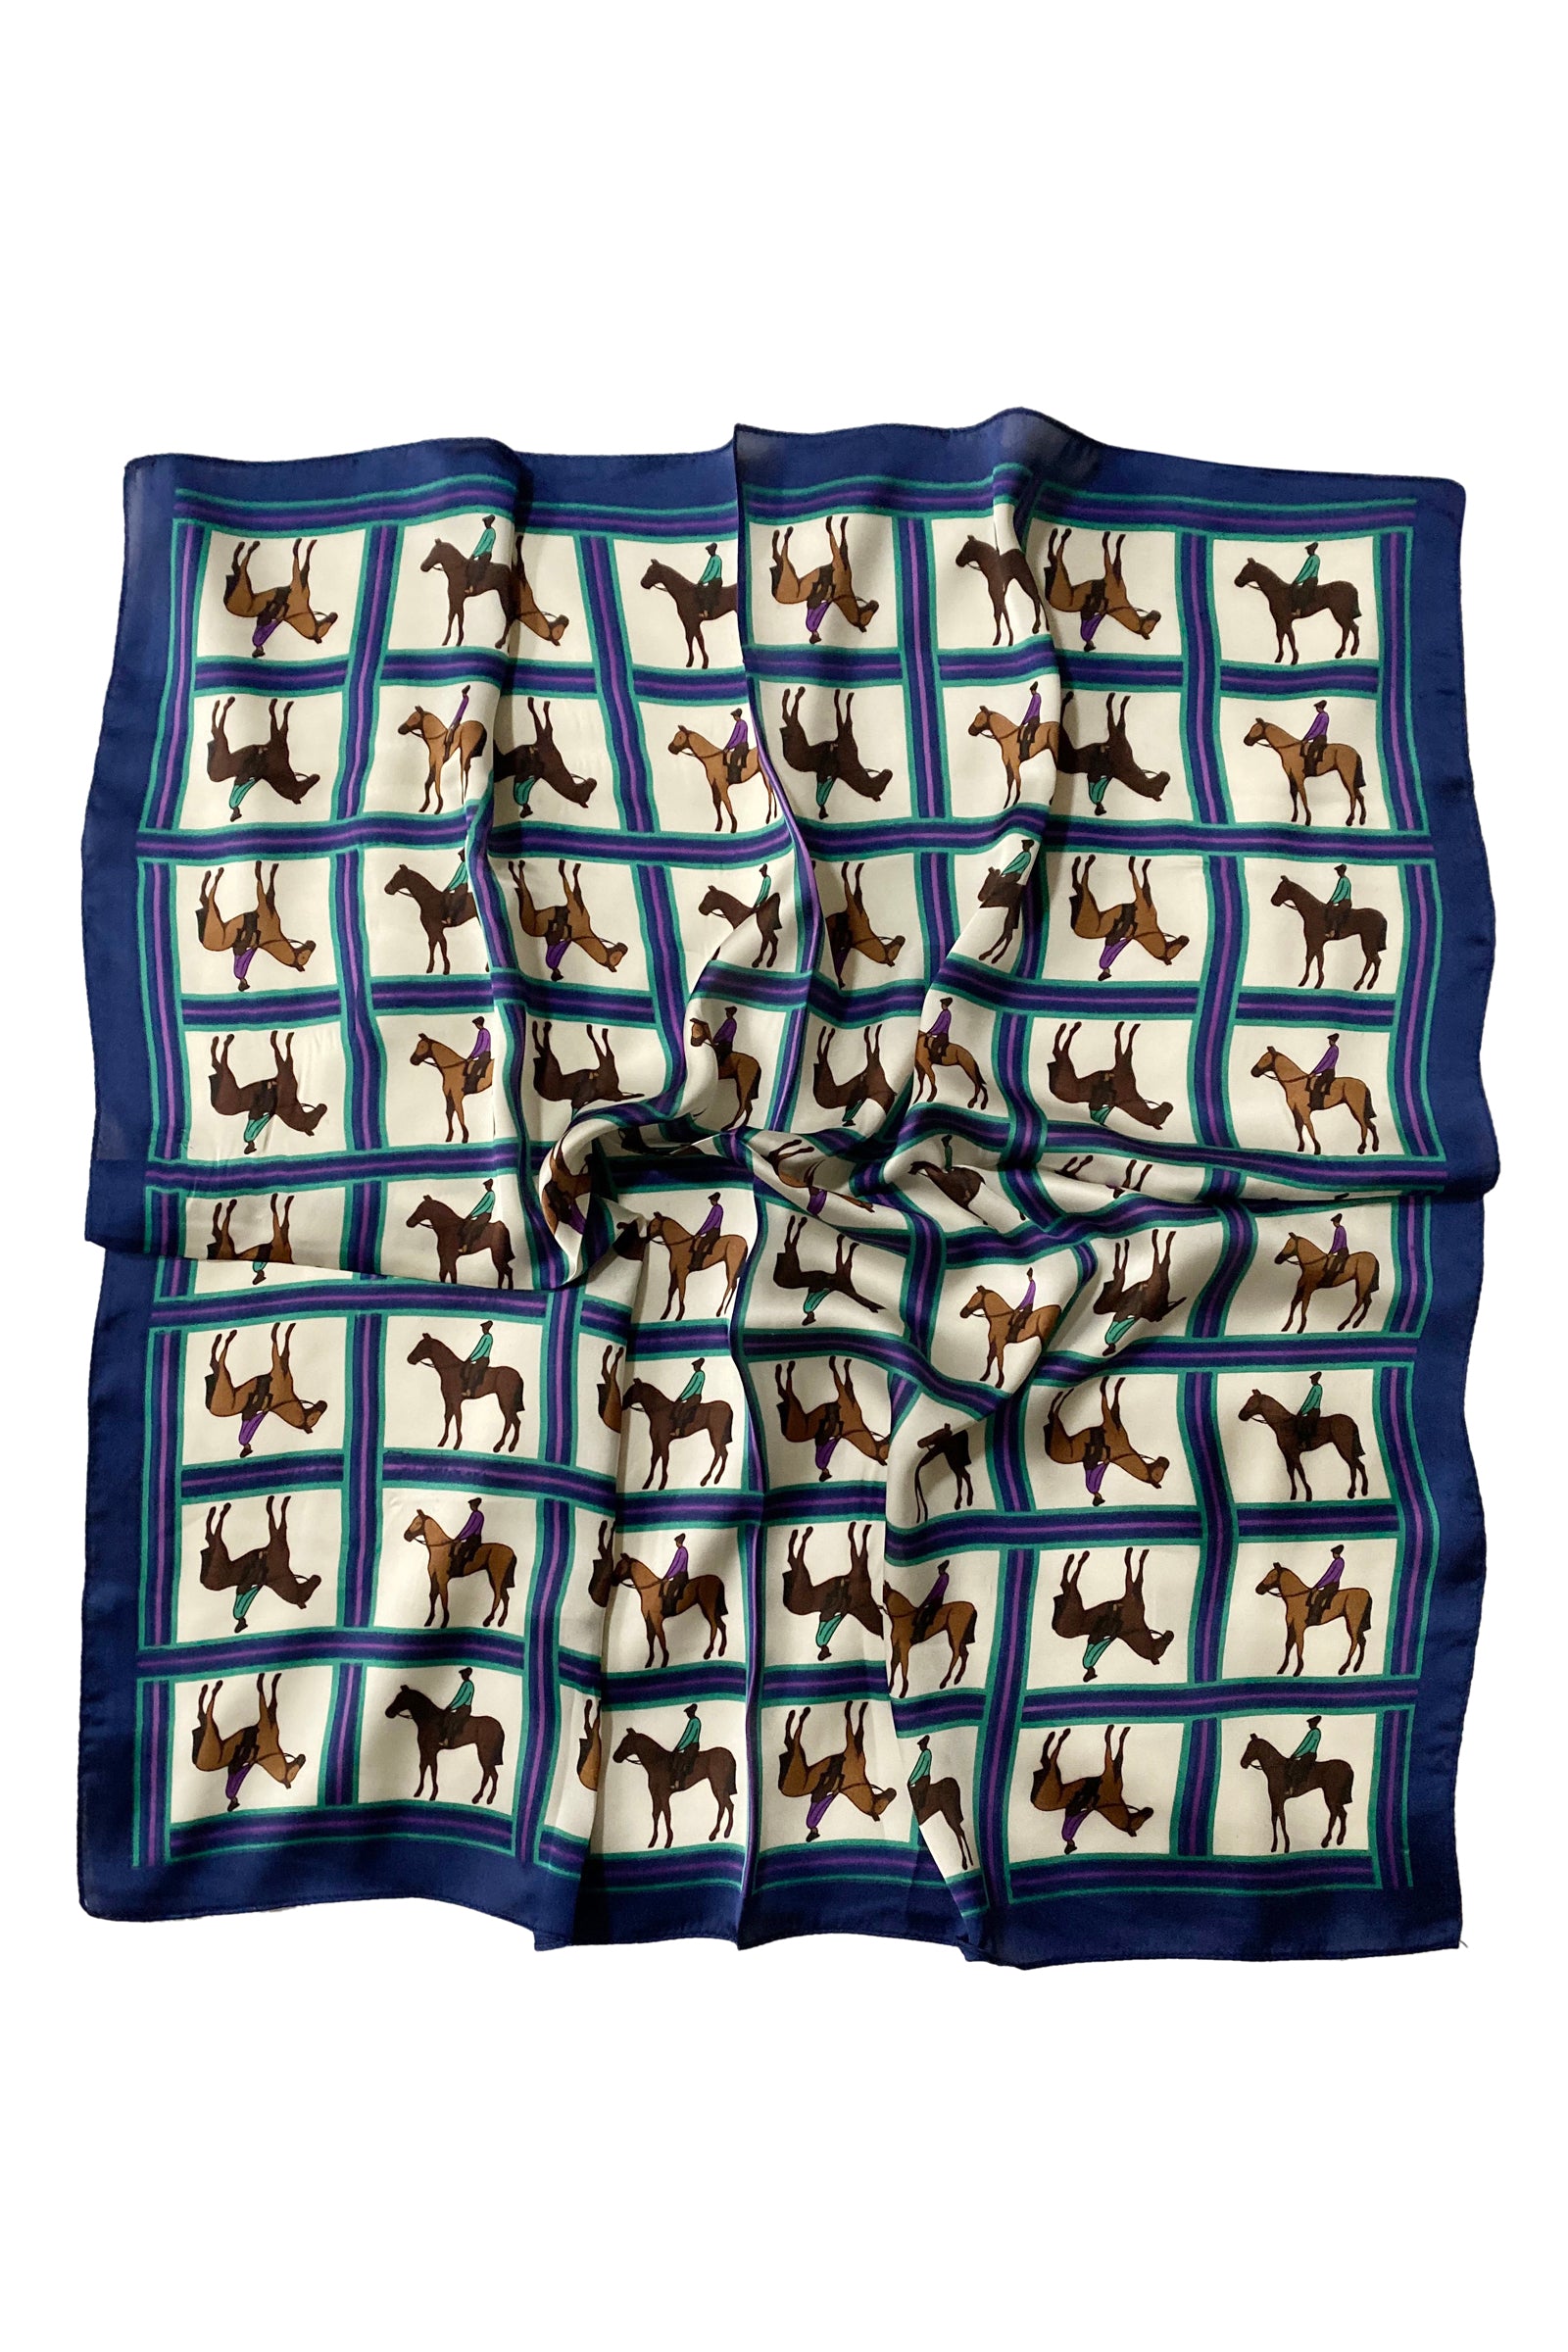 Horse Riding Print Square Scarf - Navy Blue - Oxford Blue